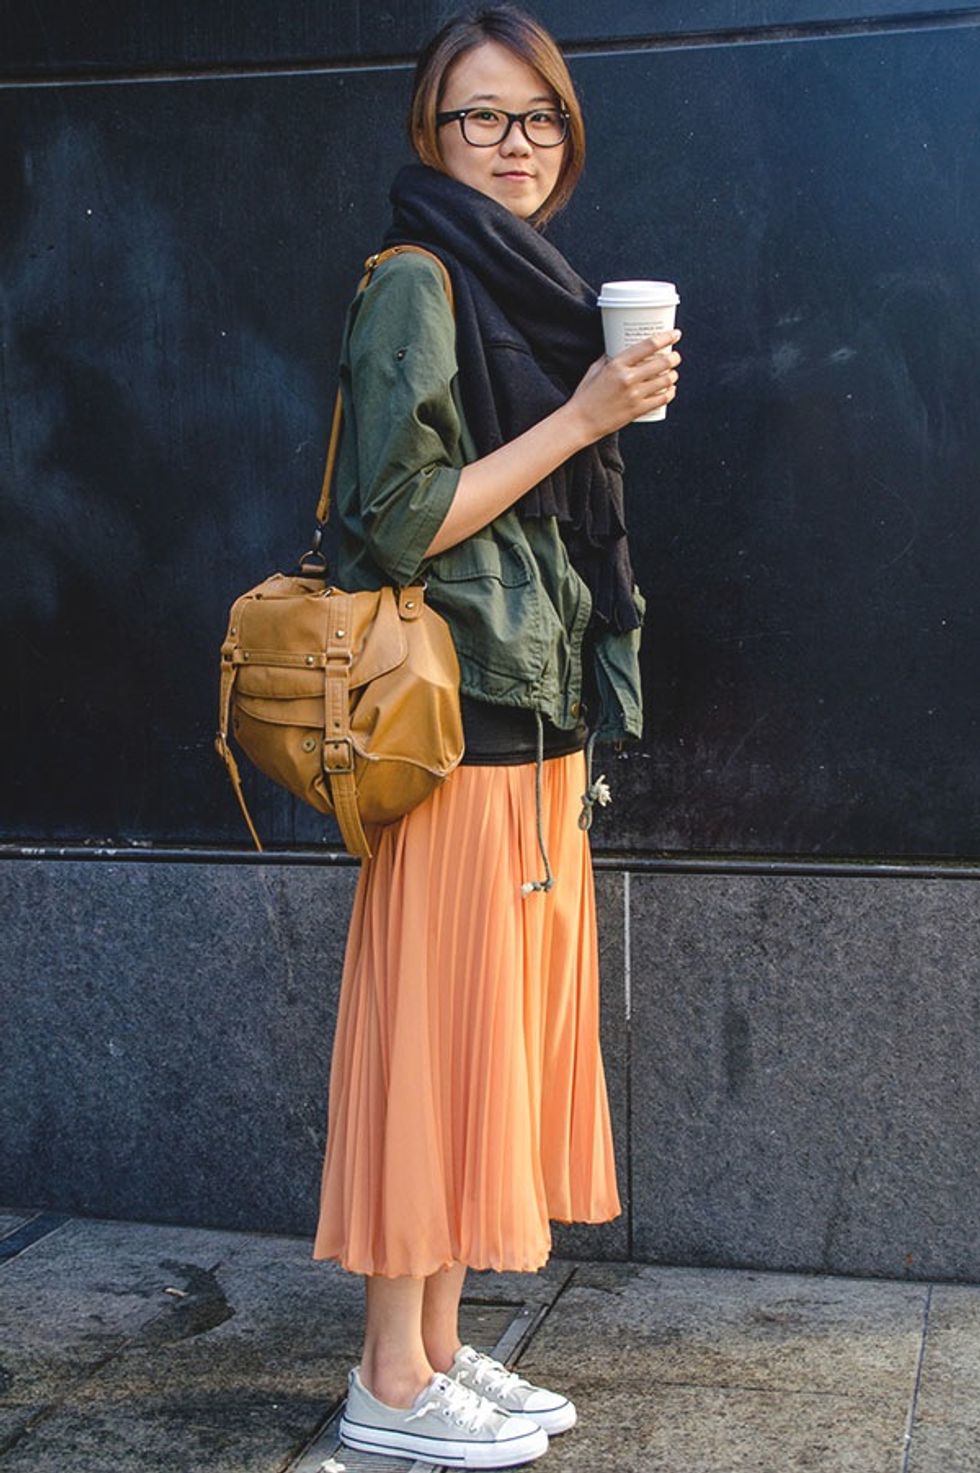 Street Style Report: A Local Student in Fresh Fall Colors